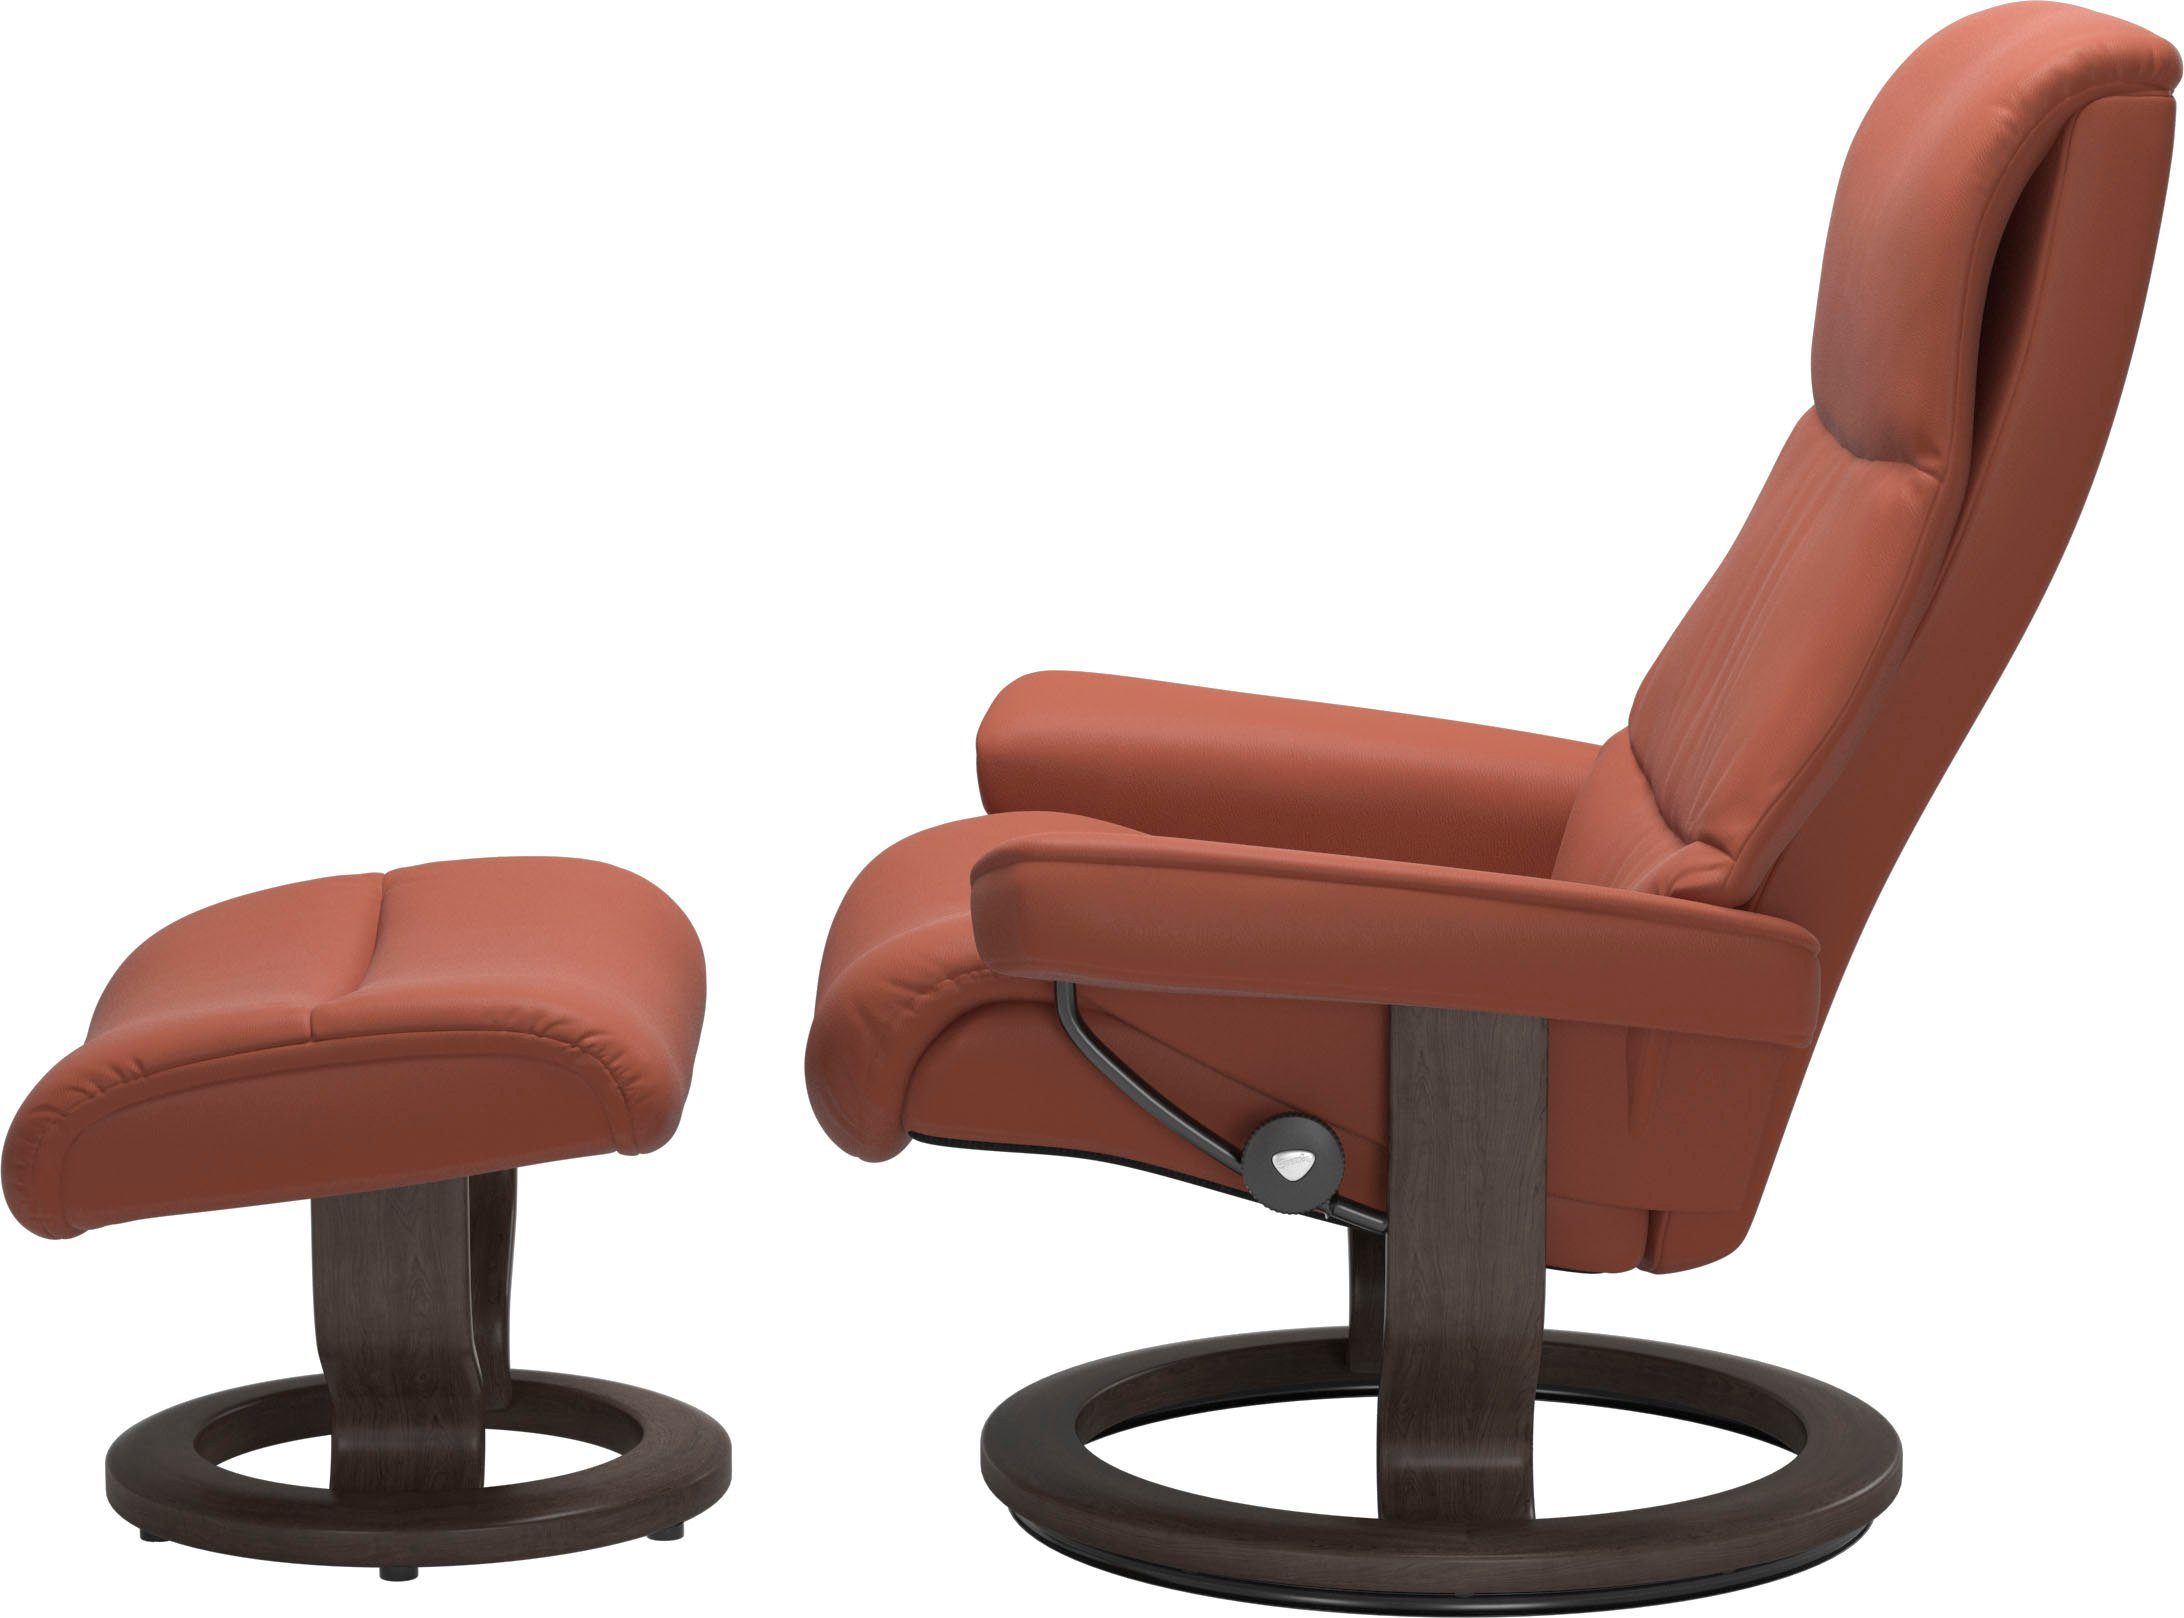 Stressless® Relaxsessel Wenge View, Base, Classic mit S,Gestell Größe